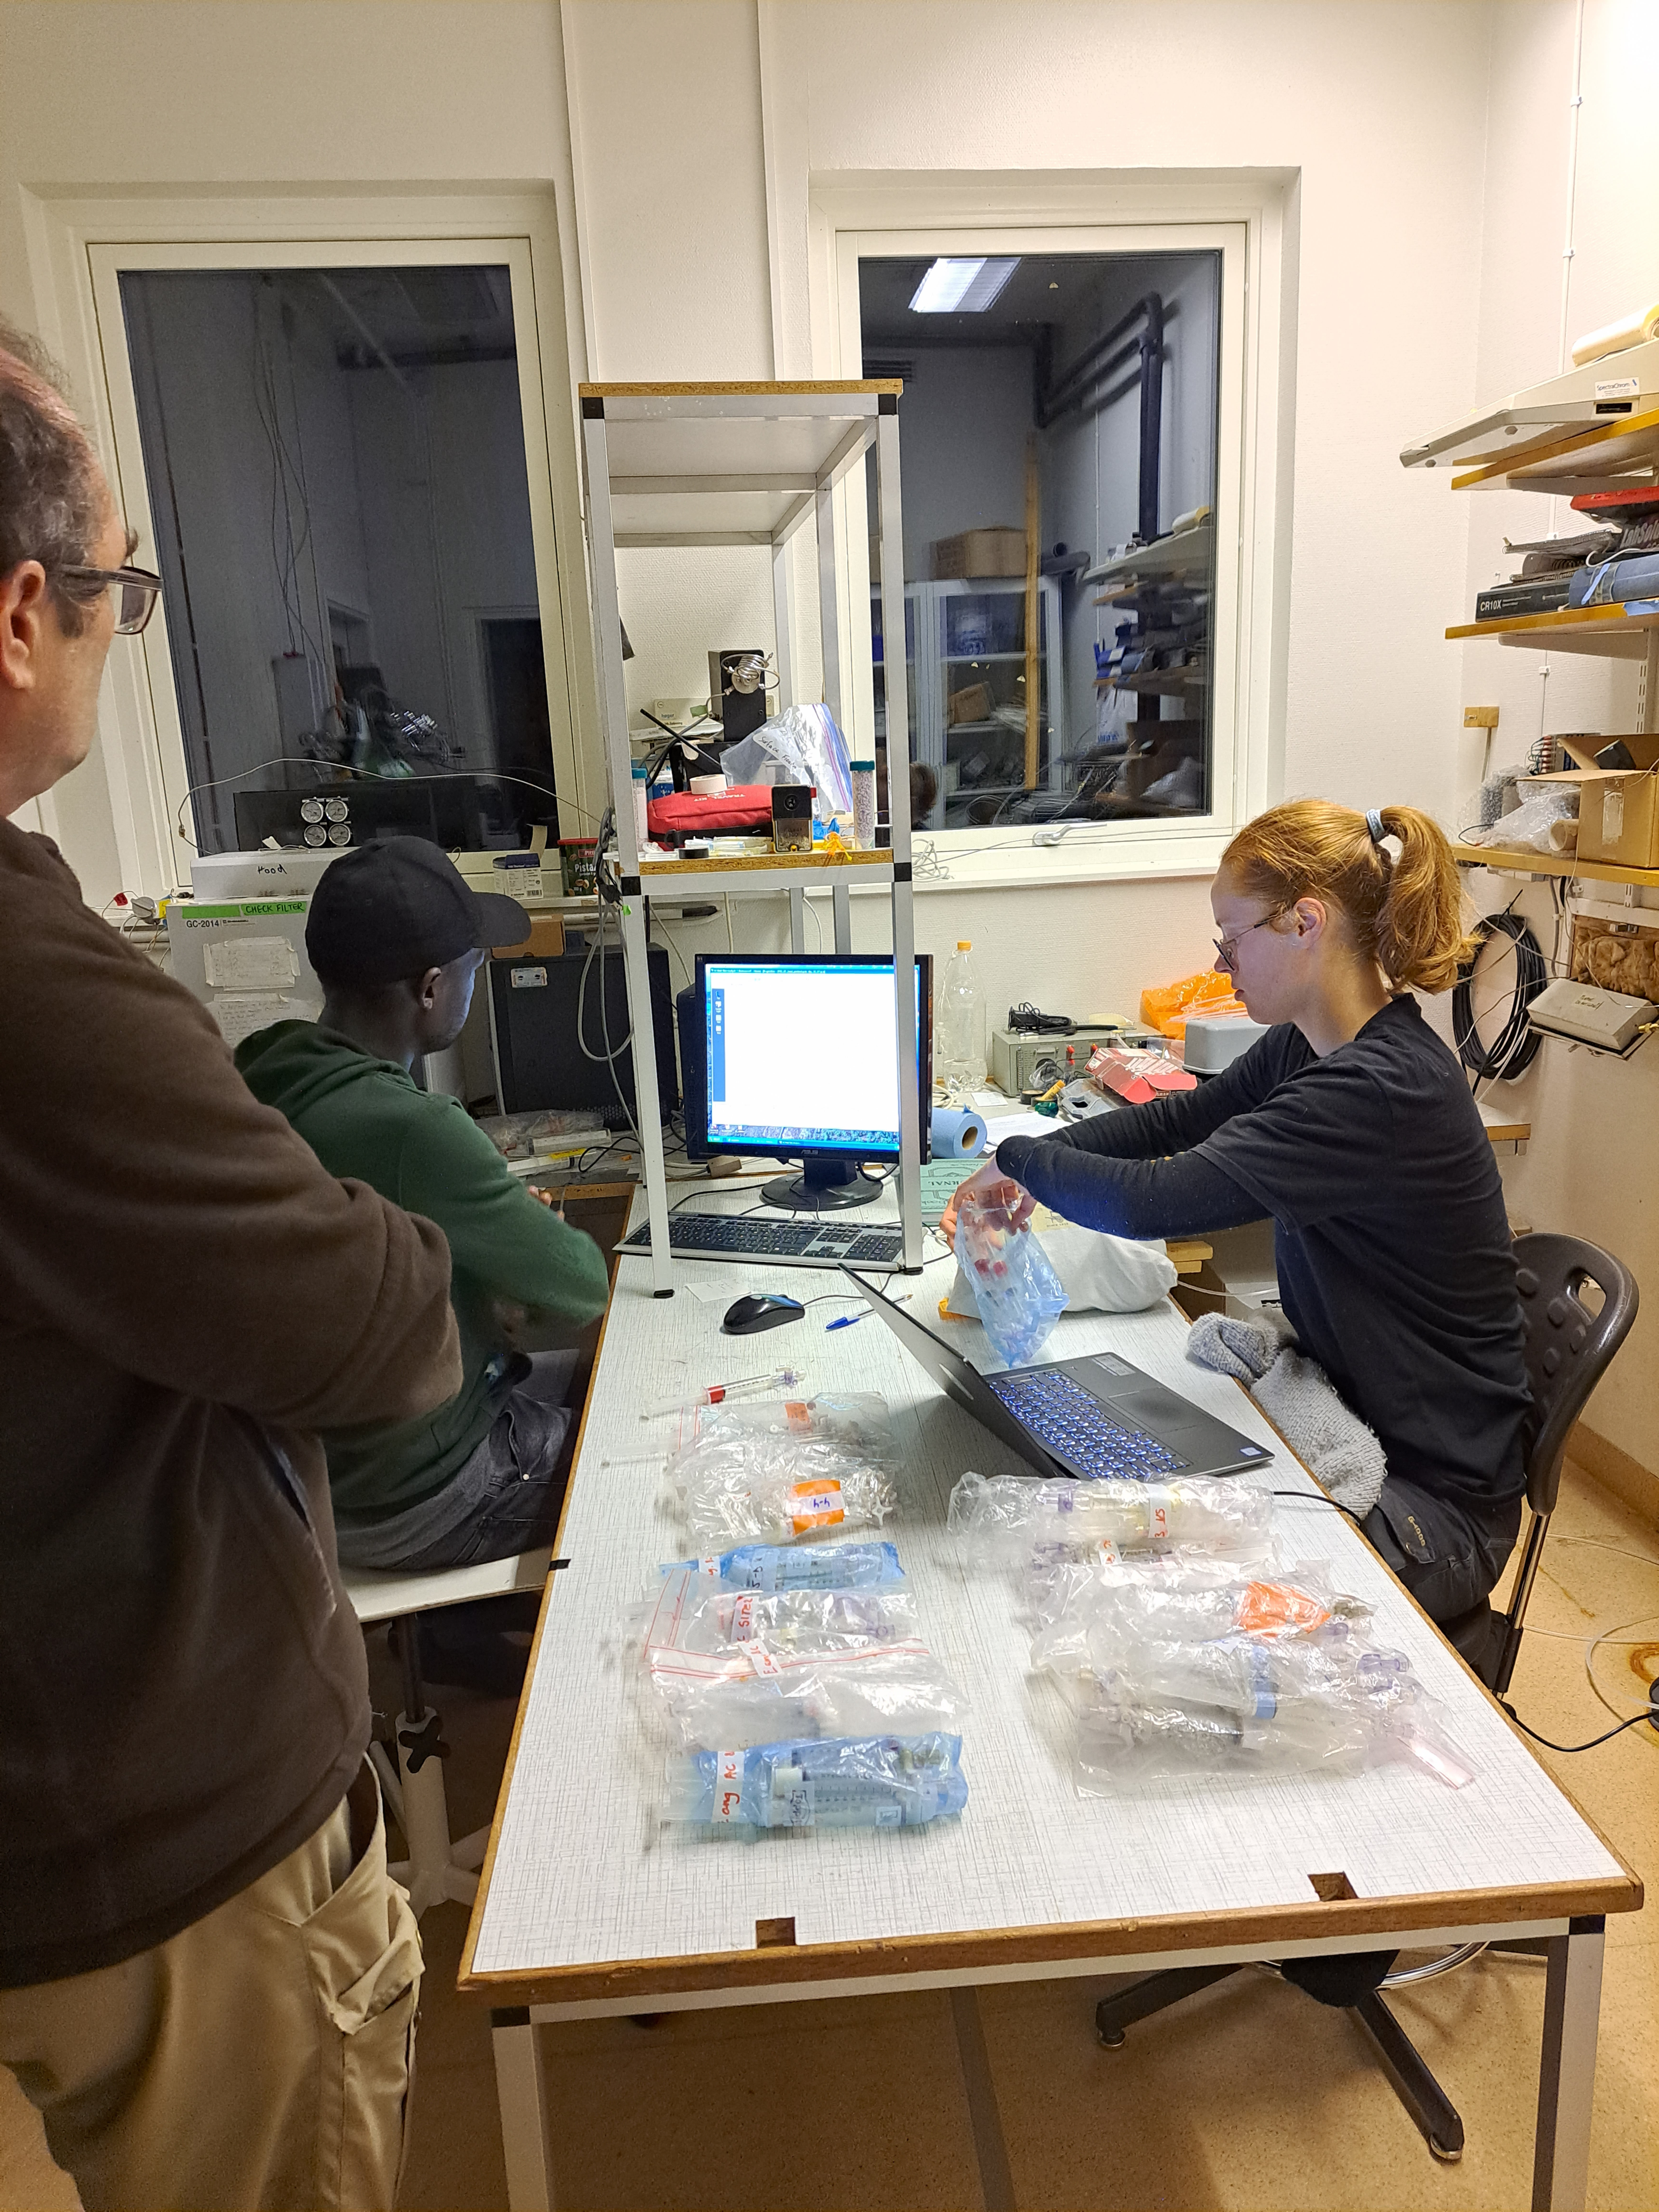 Students from Lund University analysing samples with the gas chromatograph. Photographer: Thomas Holst